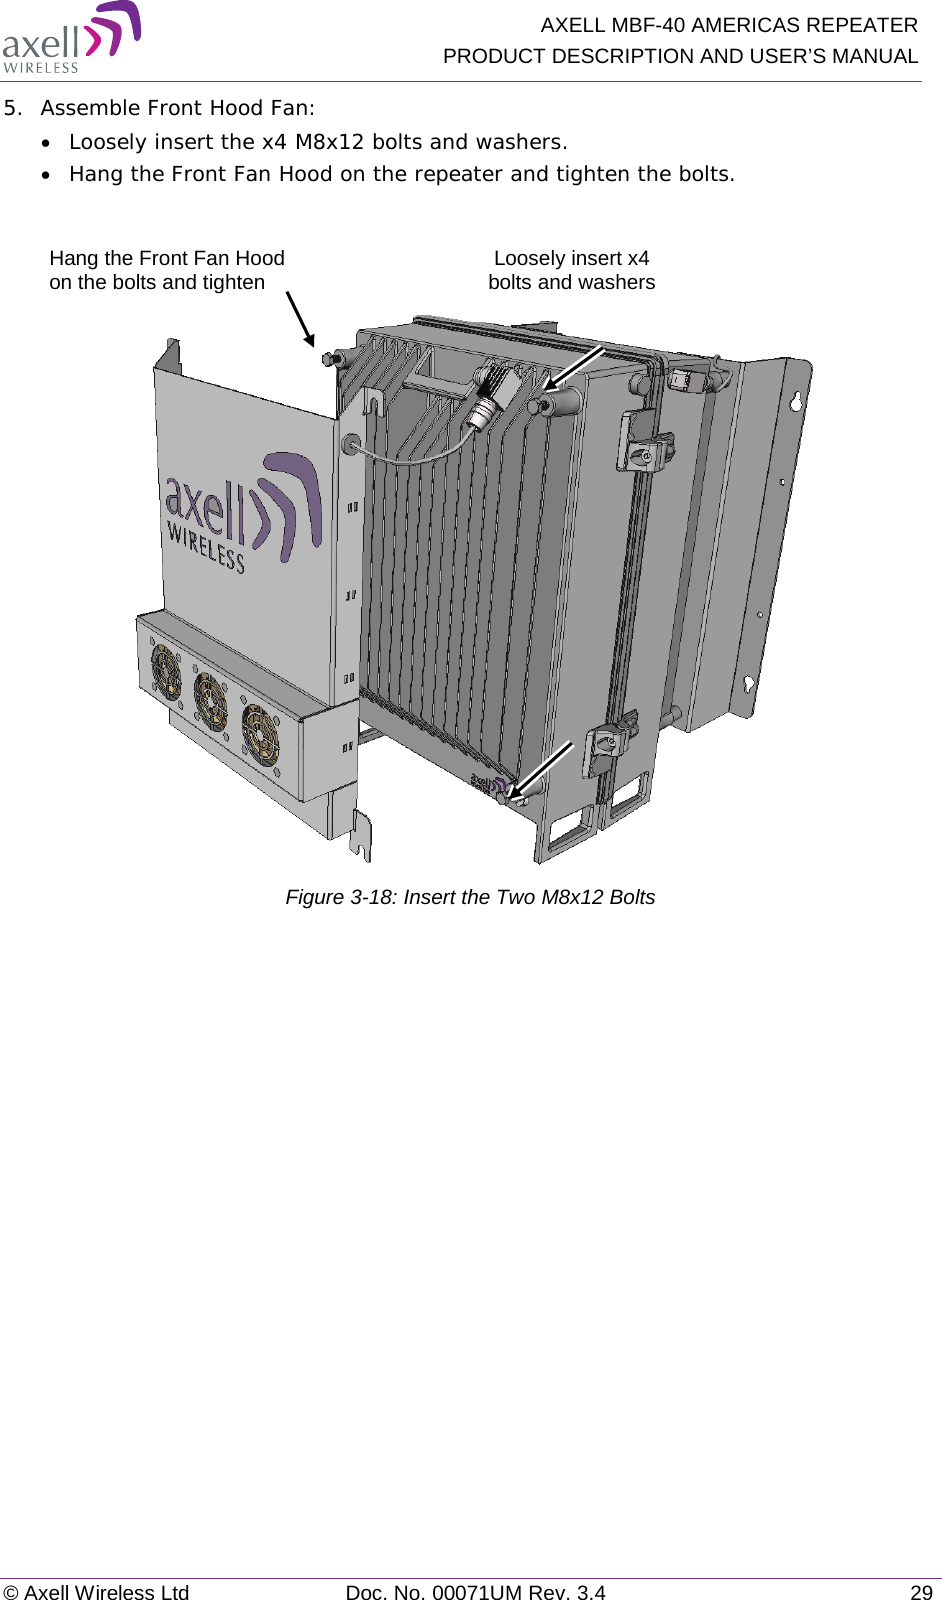   AXELL MBF-40 AMERICAS REPEATER PRODUCT DESCRIPTION AND USER’S MANUAL © Axell Wireless Ltd Doc. No. 00071UM Rev. 3.4 29 5.  Assemble Front Hood Fan: • Loosely insert the x4 M8x12 bolts and washers.  • Hang the Front Fan Hood on the repeater and tighten the bolts.    Figure  3-18: Insert the Two M8x12 Bolts   Loosely insert x4 bolts and washers Hang the Front Fan Hood on the bolts and tighten 